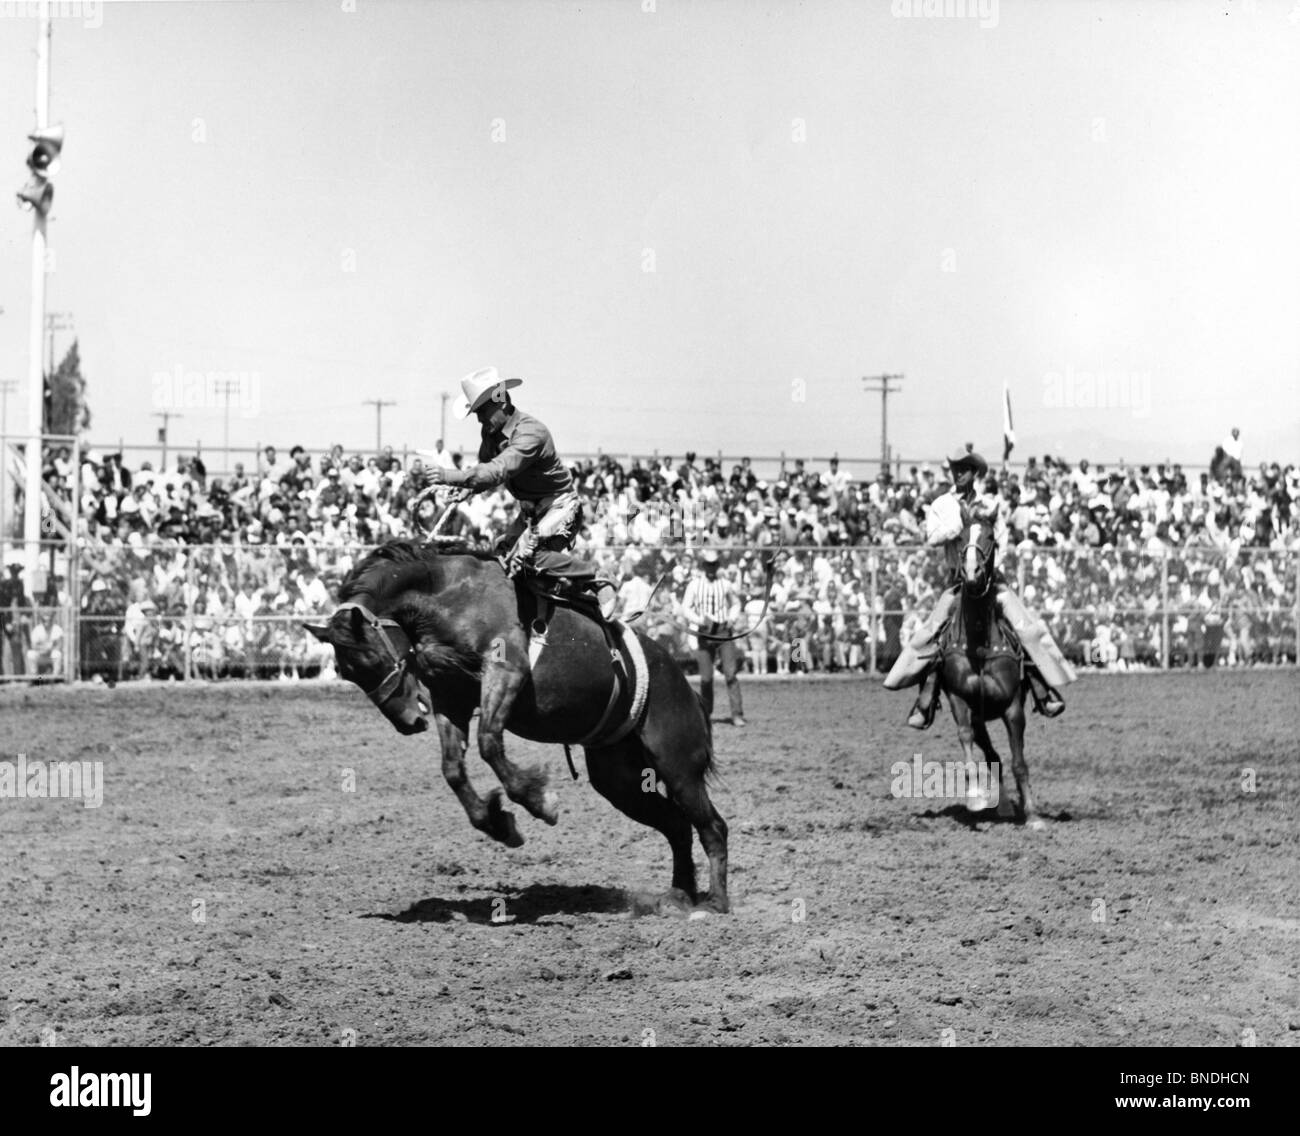 Two cowboys riding bucking horses in a rodeo Stock Photo